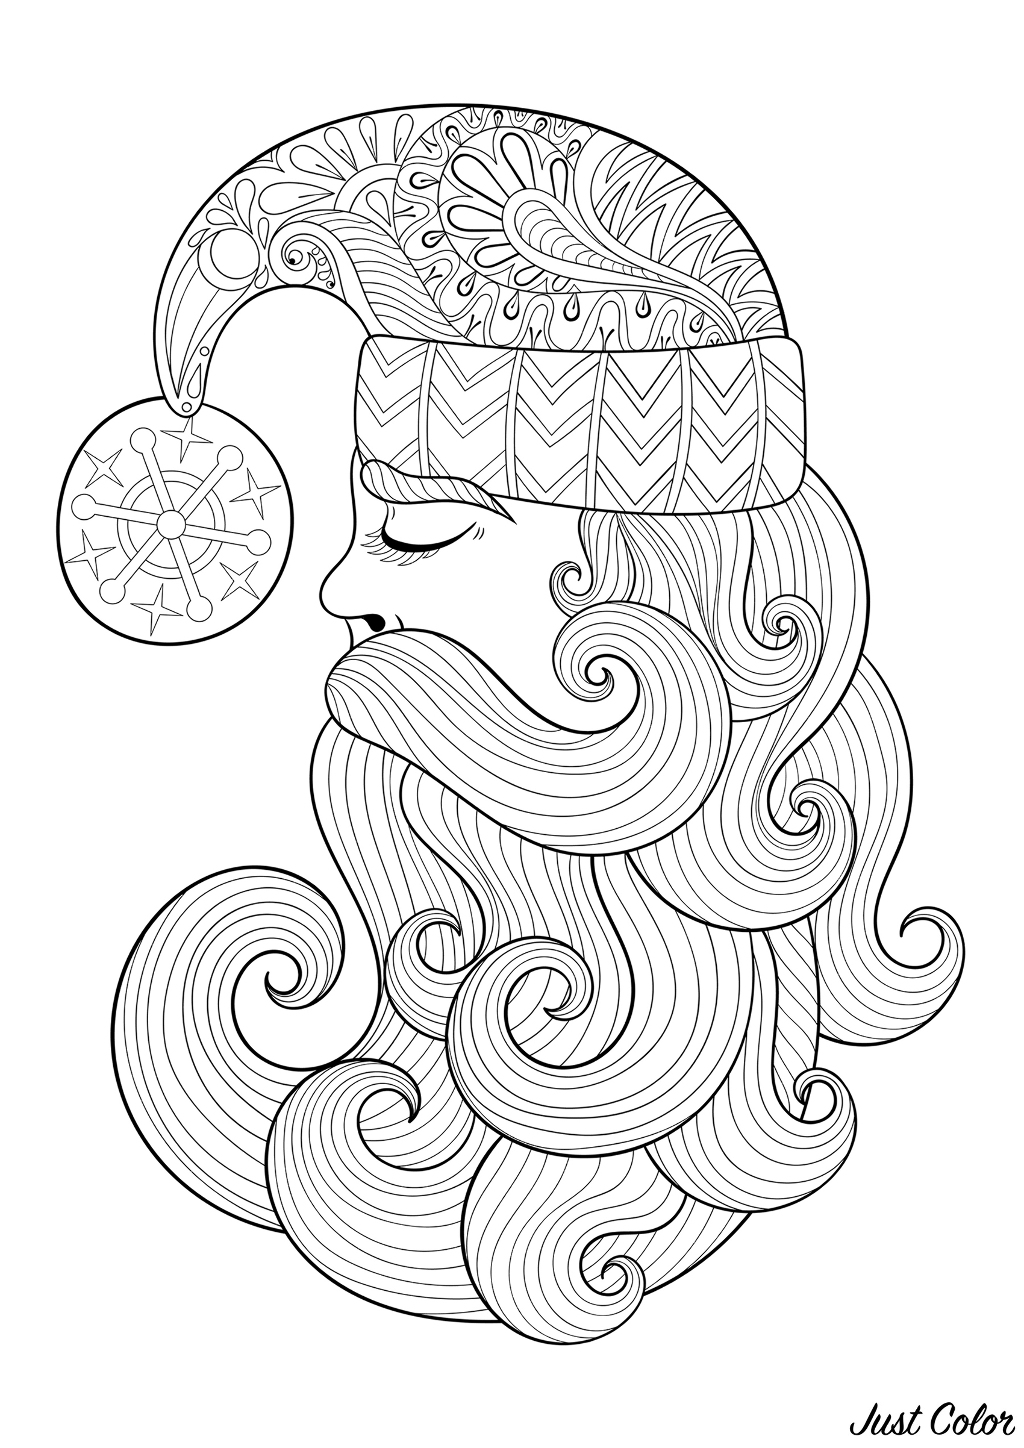 Coloring page of Santa Claus seen in profile, looking like the moon